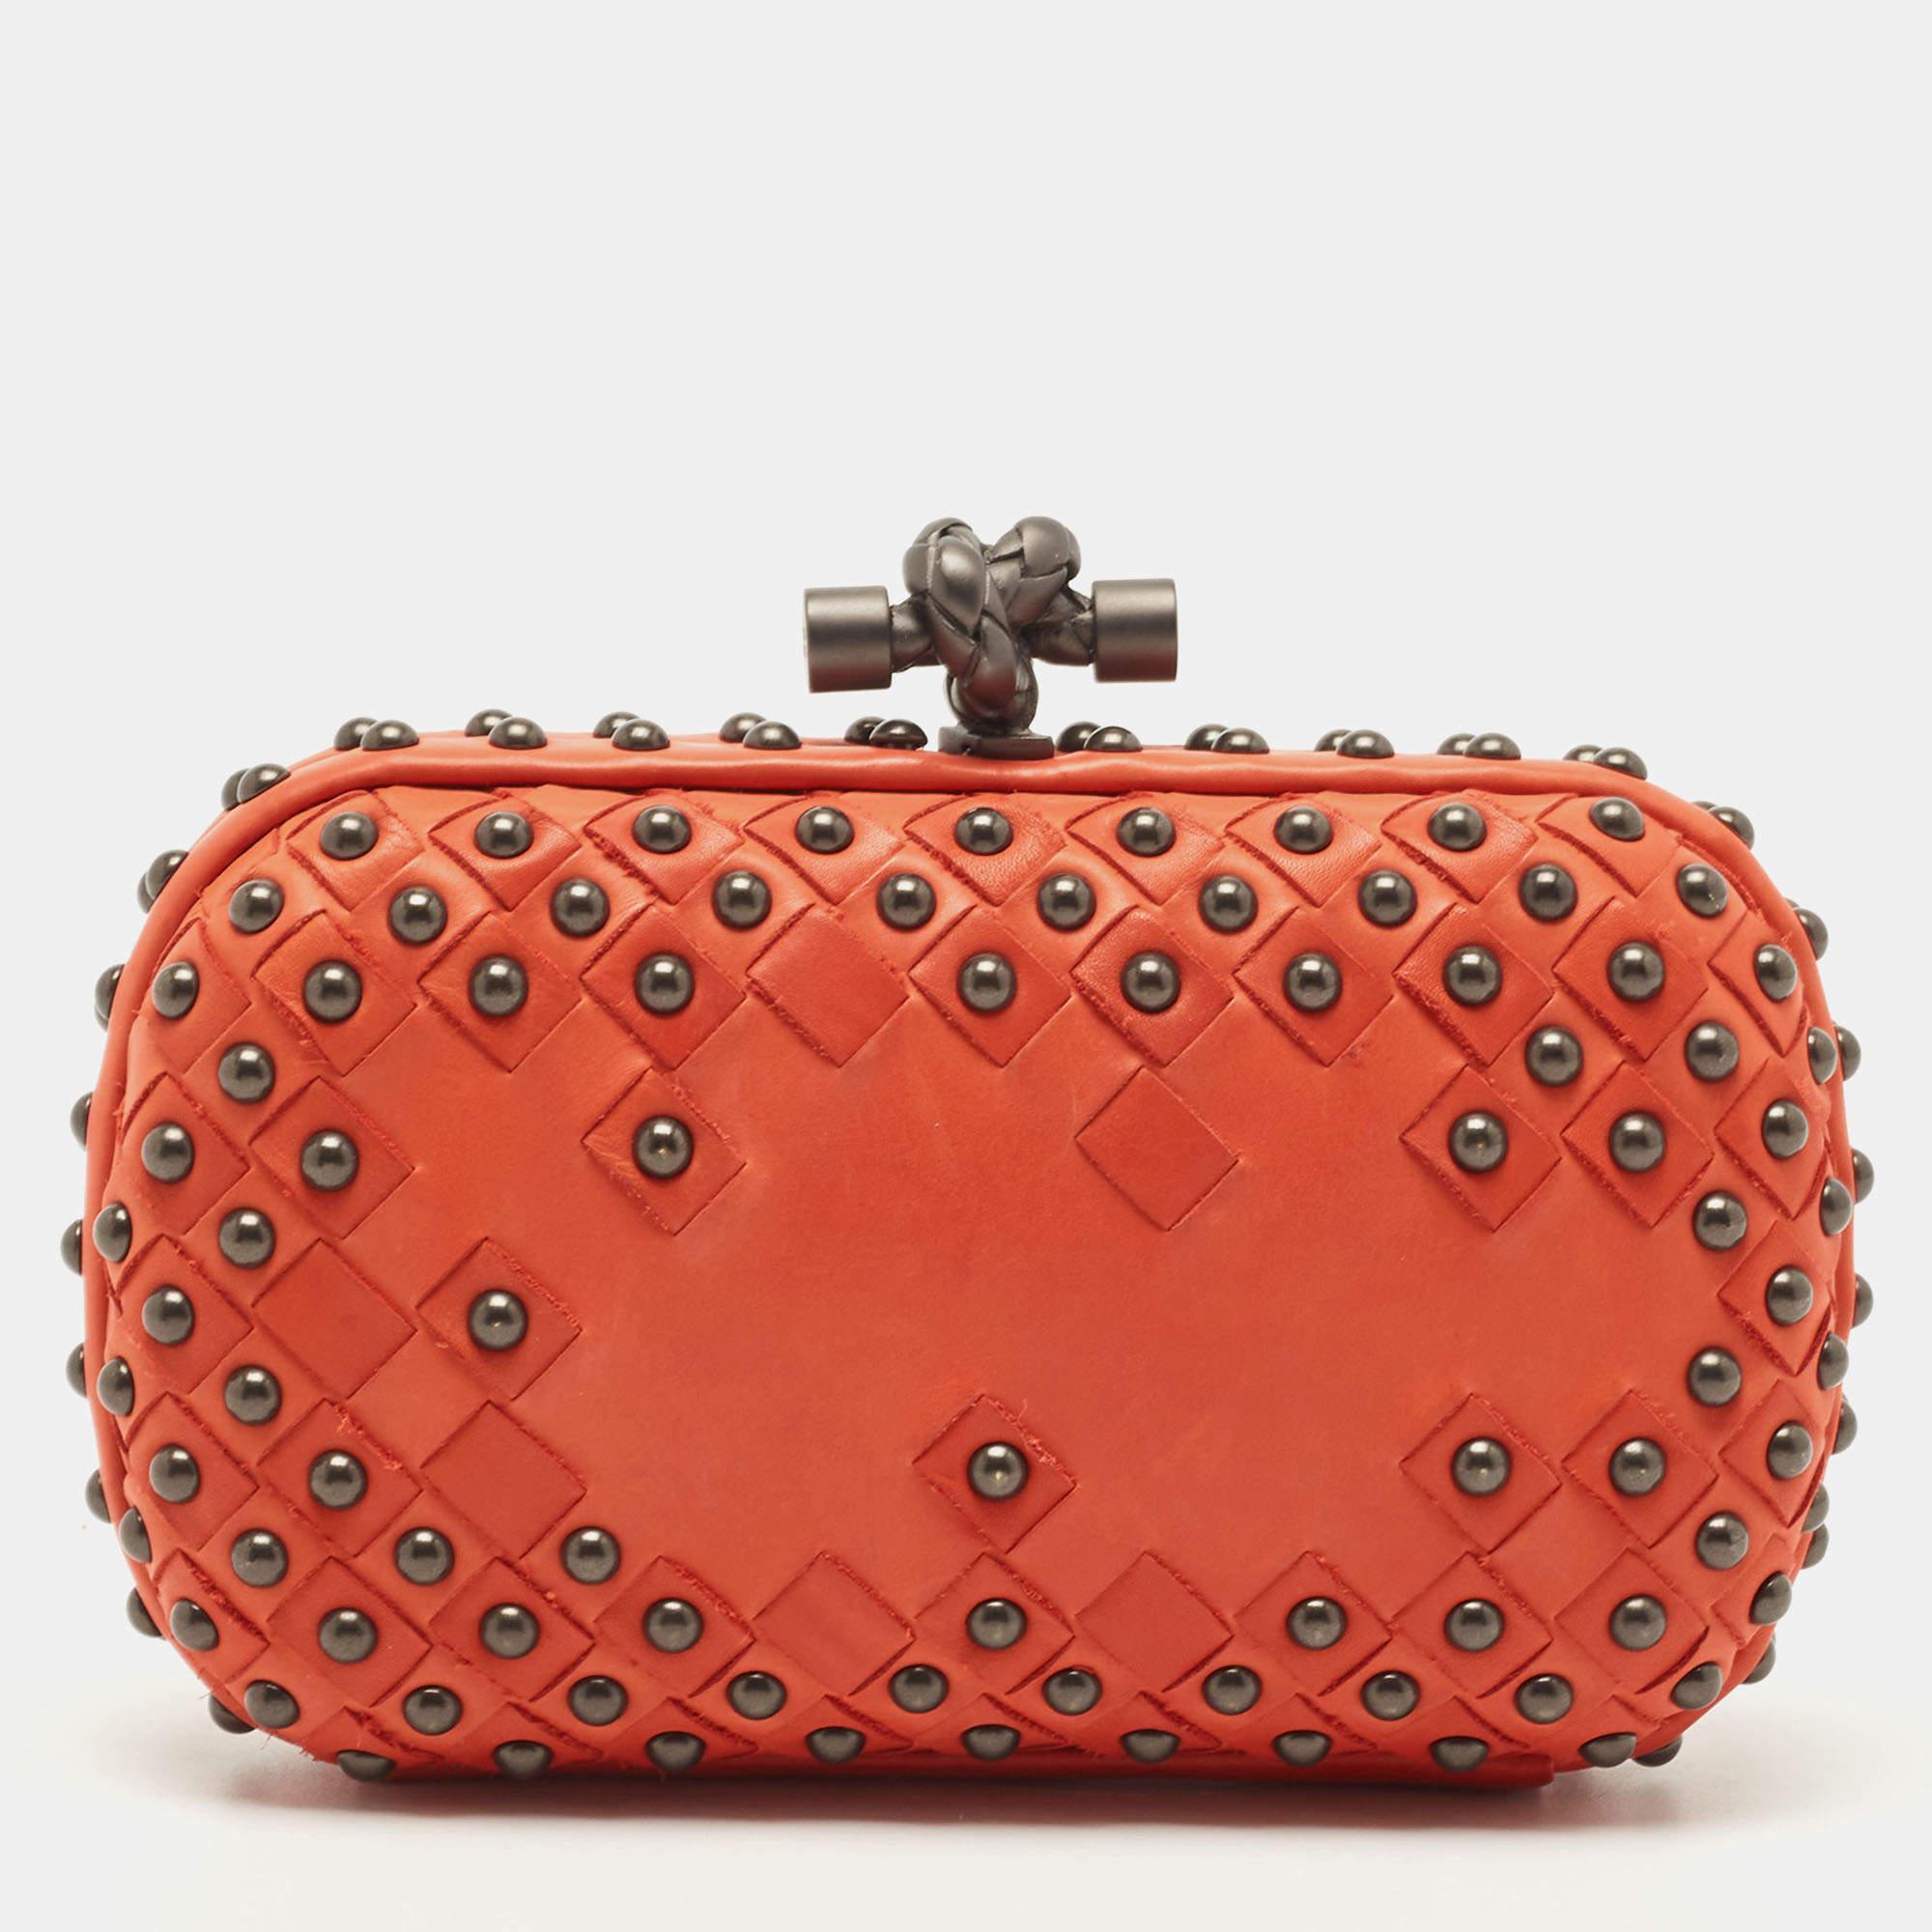 This Bottega Veneta clutch is just the right accessory to compliment your chic ensemble. It comes crafted in quality material featuring a roomy interior that can comfortably hold all your little essentials like lipstick, cards, and phone.

